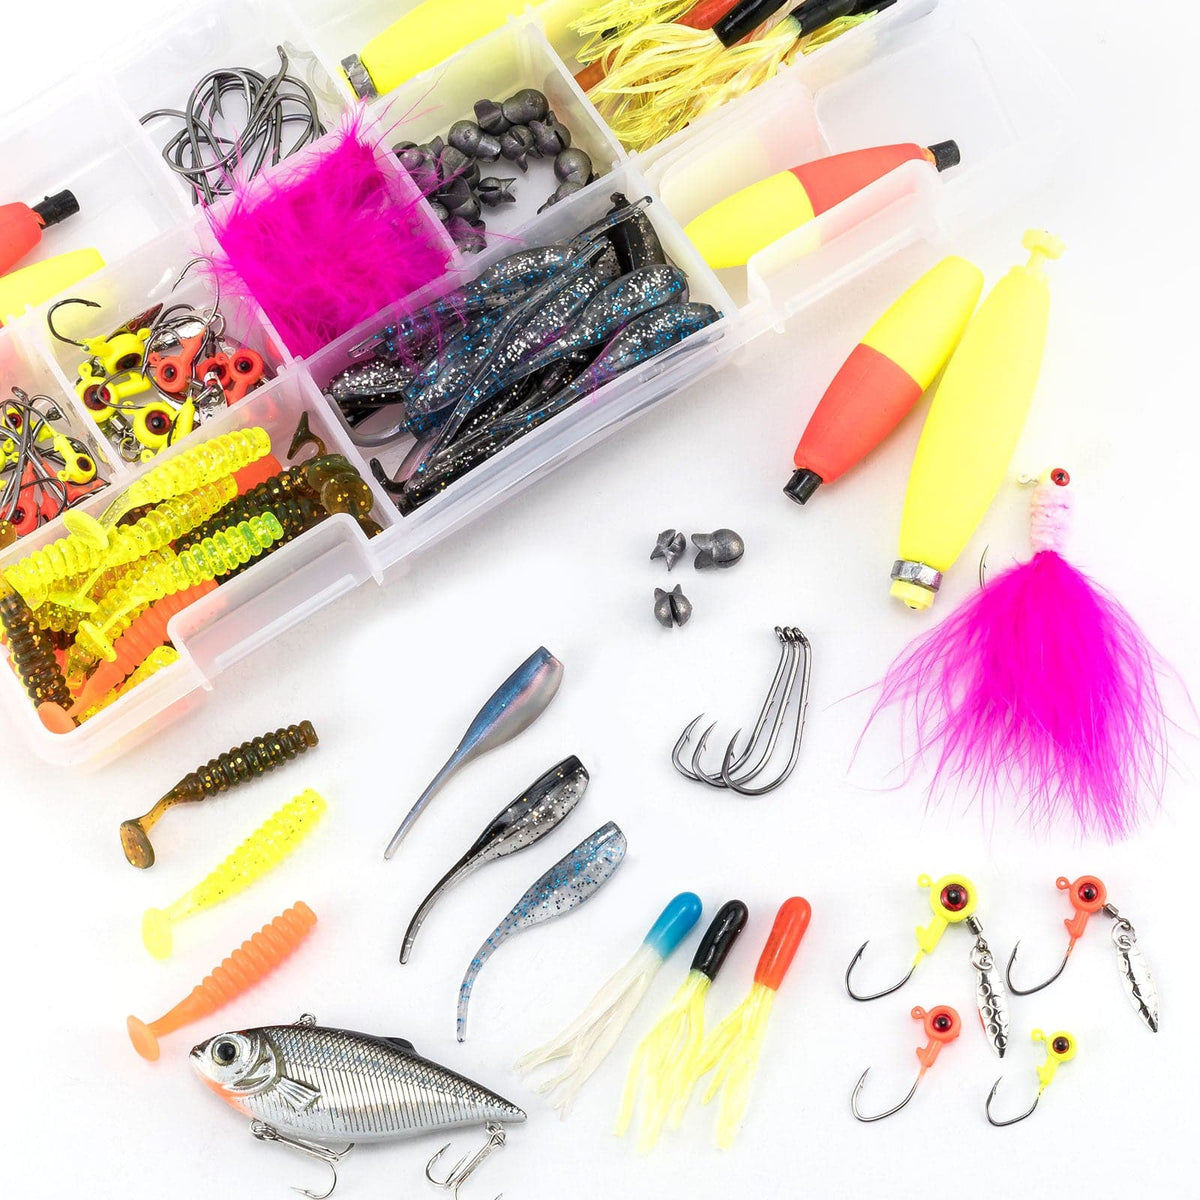 2023 Happy New Year: Crappie Fishing Tackles Lures Kit Huge in Box